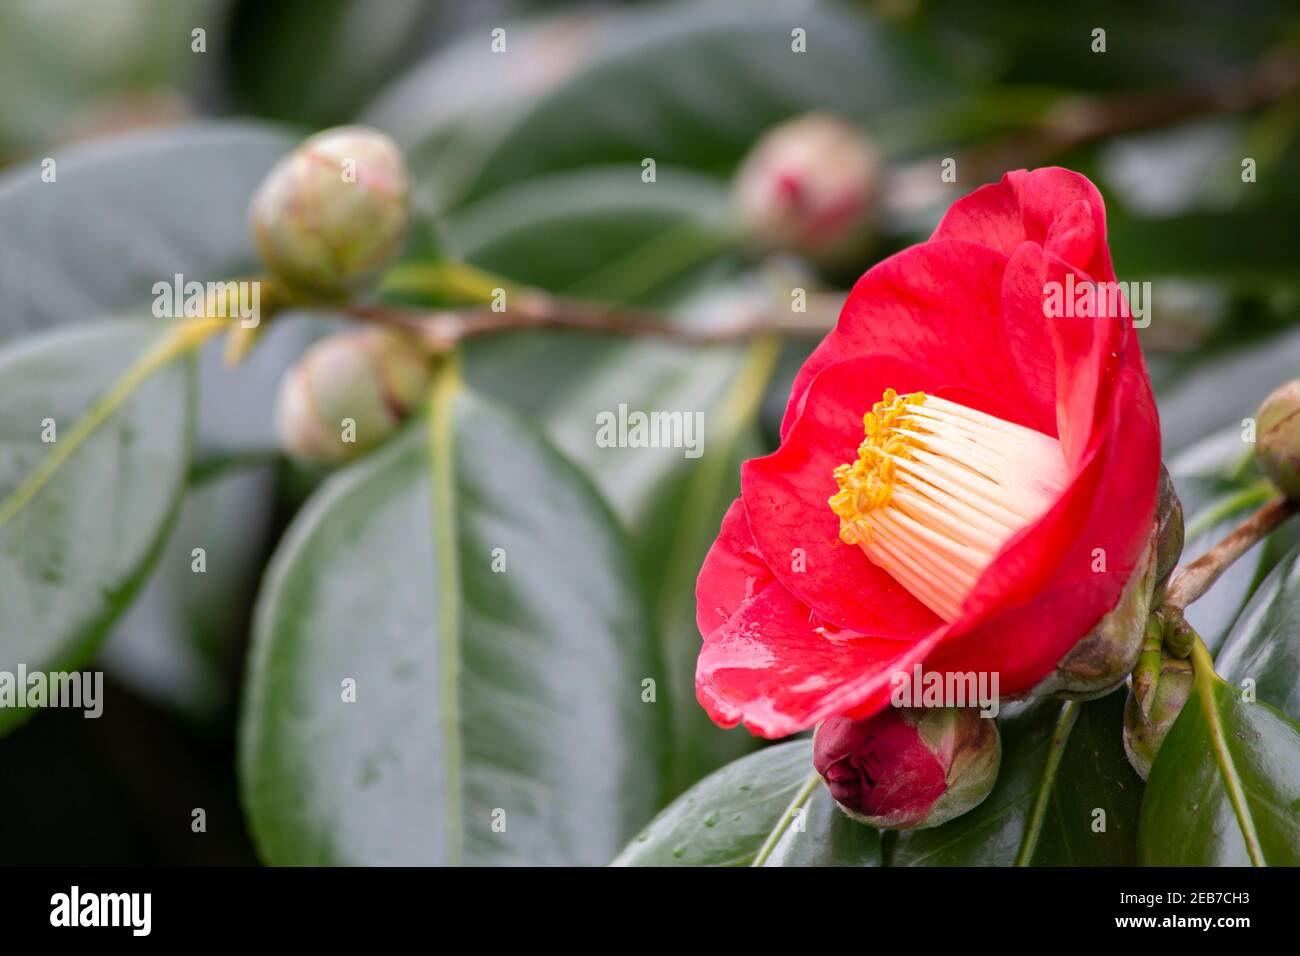 A camellia flower in the foreground and some buds about to bloom in the background out of focus, selective focus Stock Photo